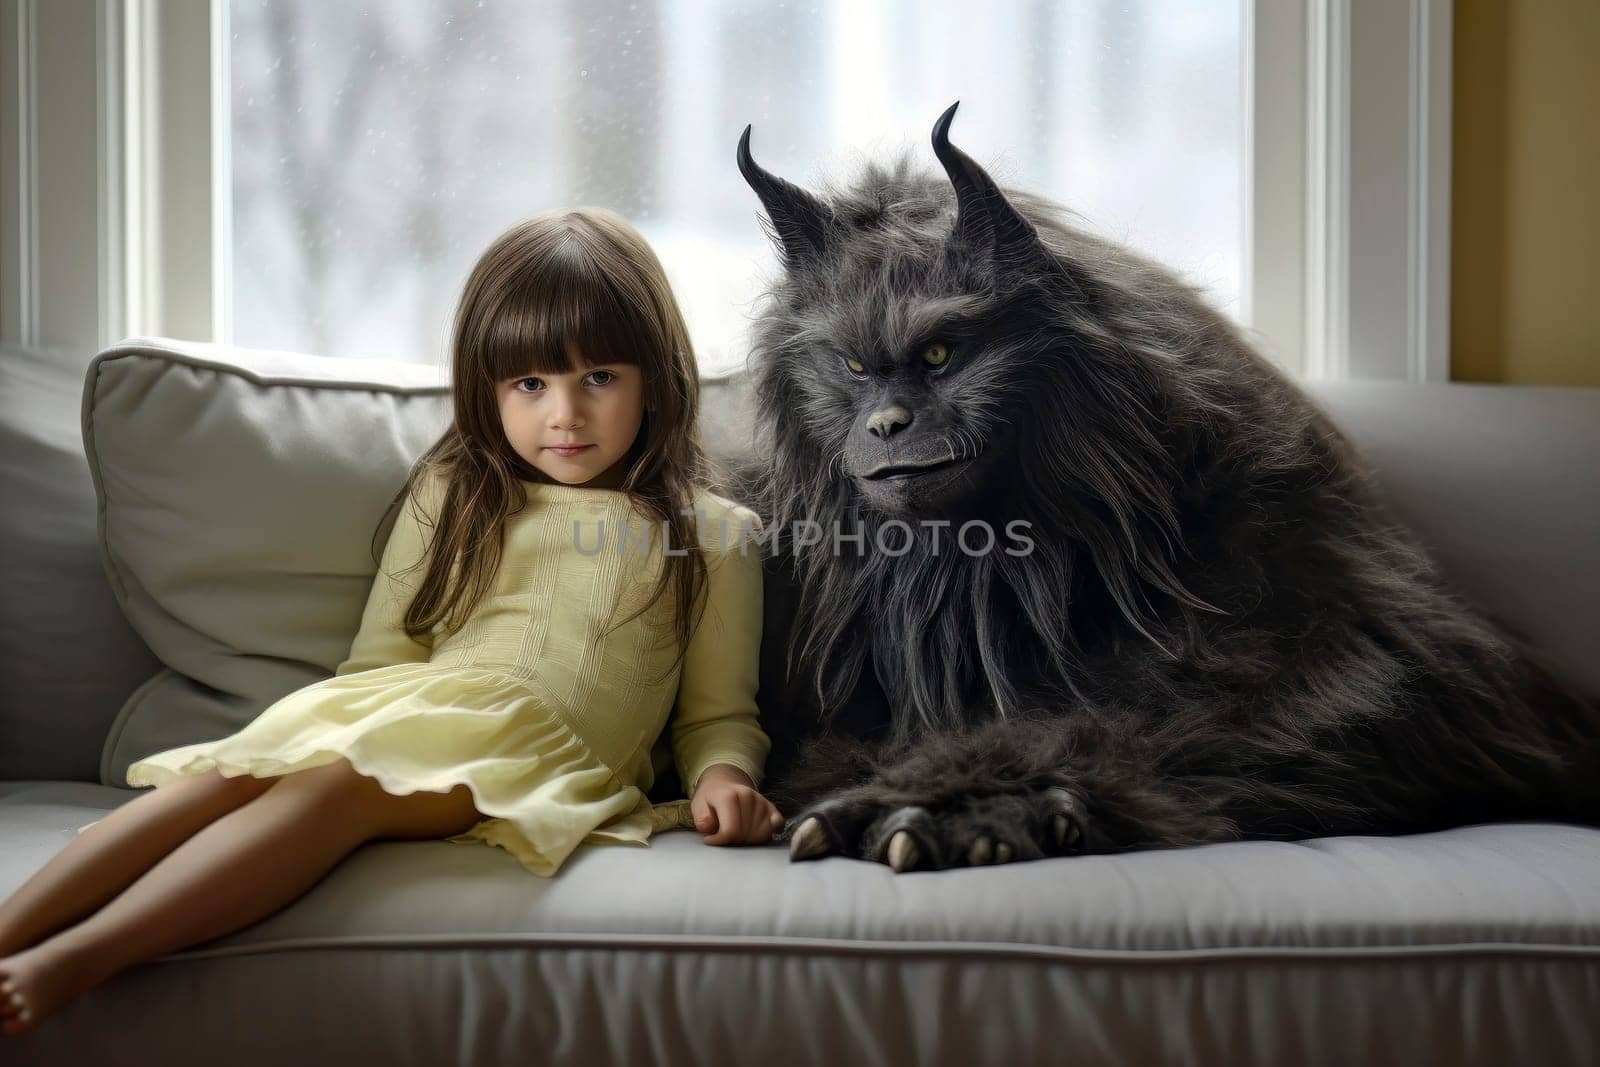 A captivating image of a girl sitting on a couch with a haunting presence of a demon. Contrasting innocence and darkness.